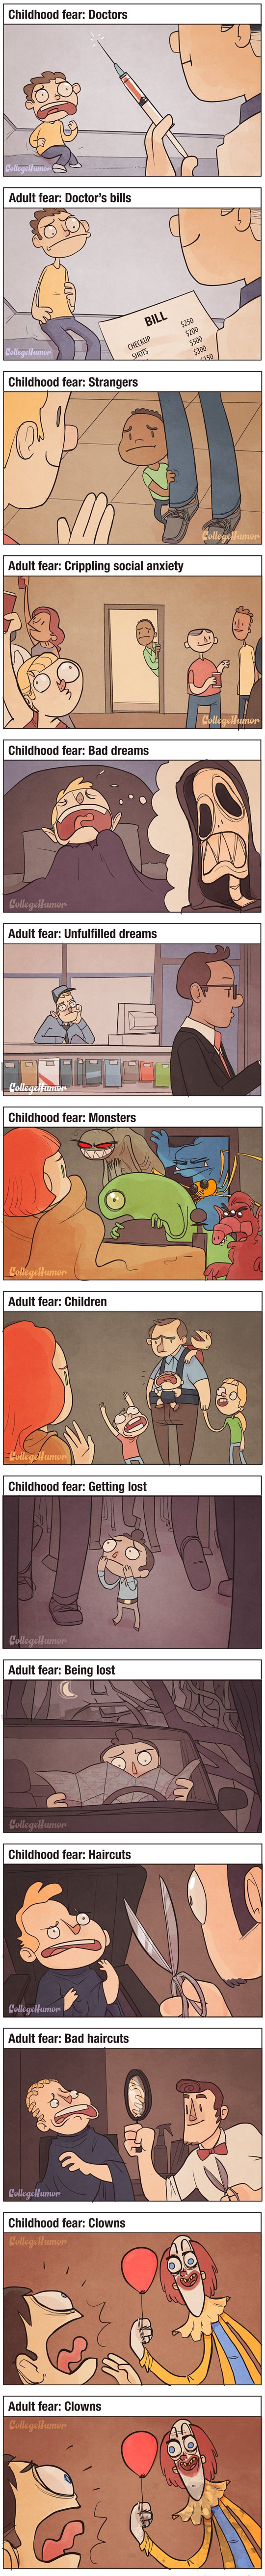 Child Fears Vs. Adult Fears